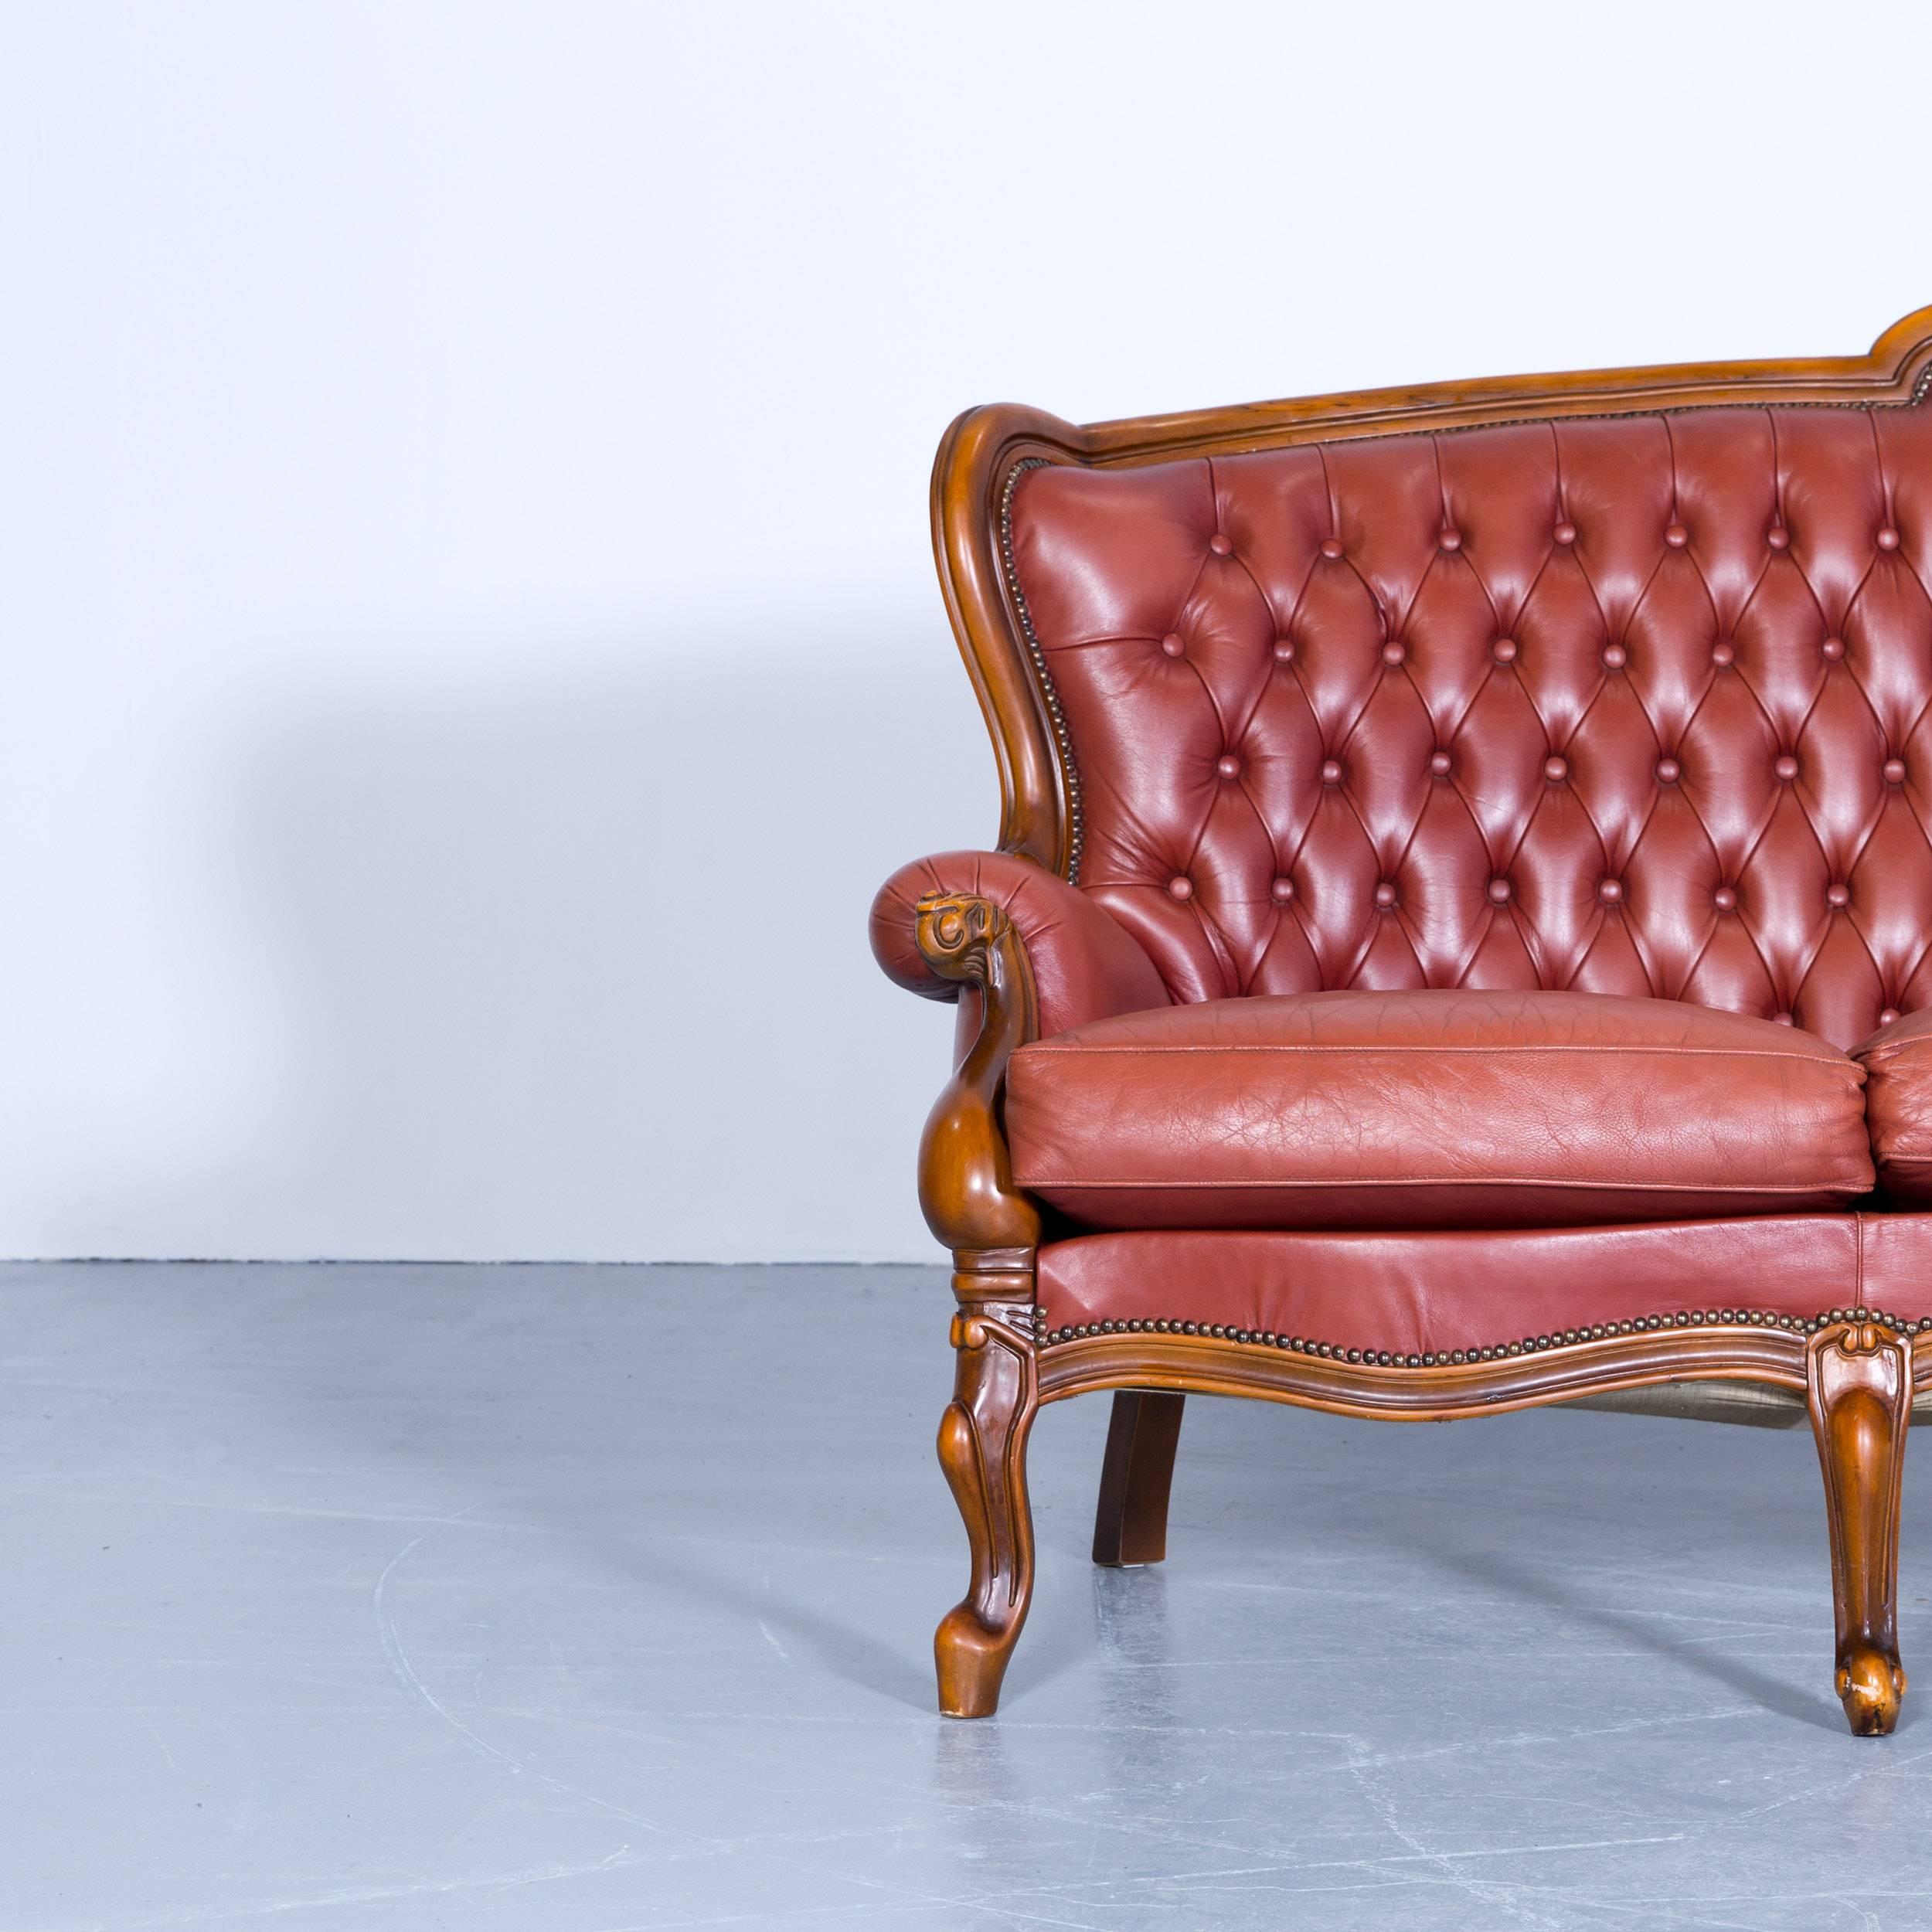 Barock Chesterfield sofa red brown orange leather three-seat couch vintage retro rivets, made for pure comfort.